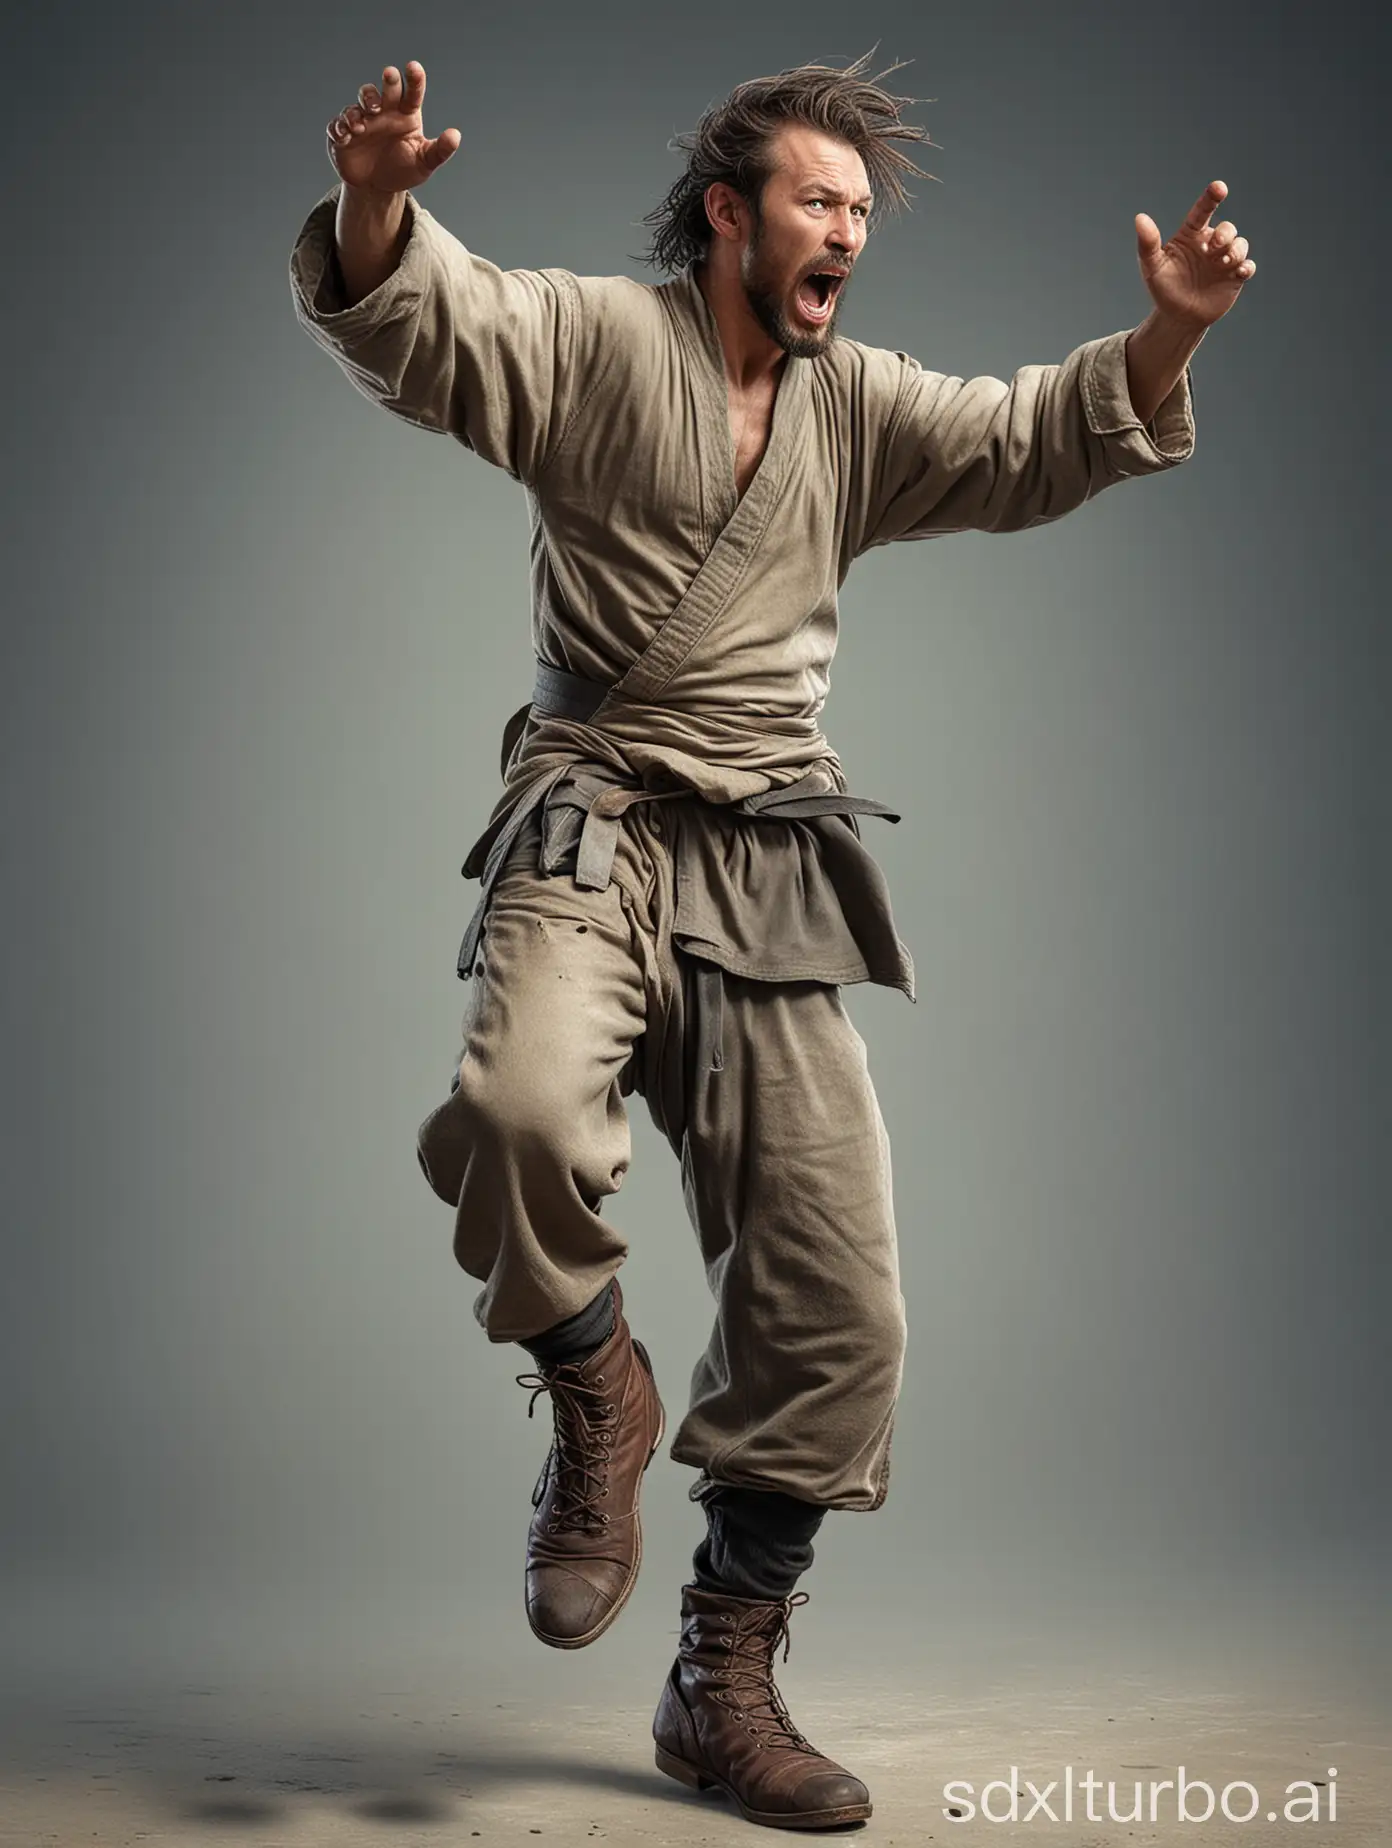 As crazy homeless madman in a full body portrait is doing rear back swinging  kung fu kick with his left boot high into the air. This is a photo realistic high resolution image with sharp clean subject focus